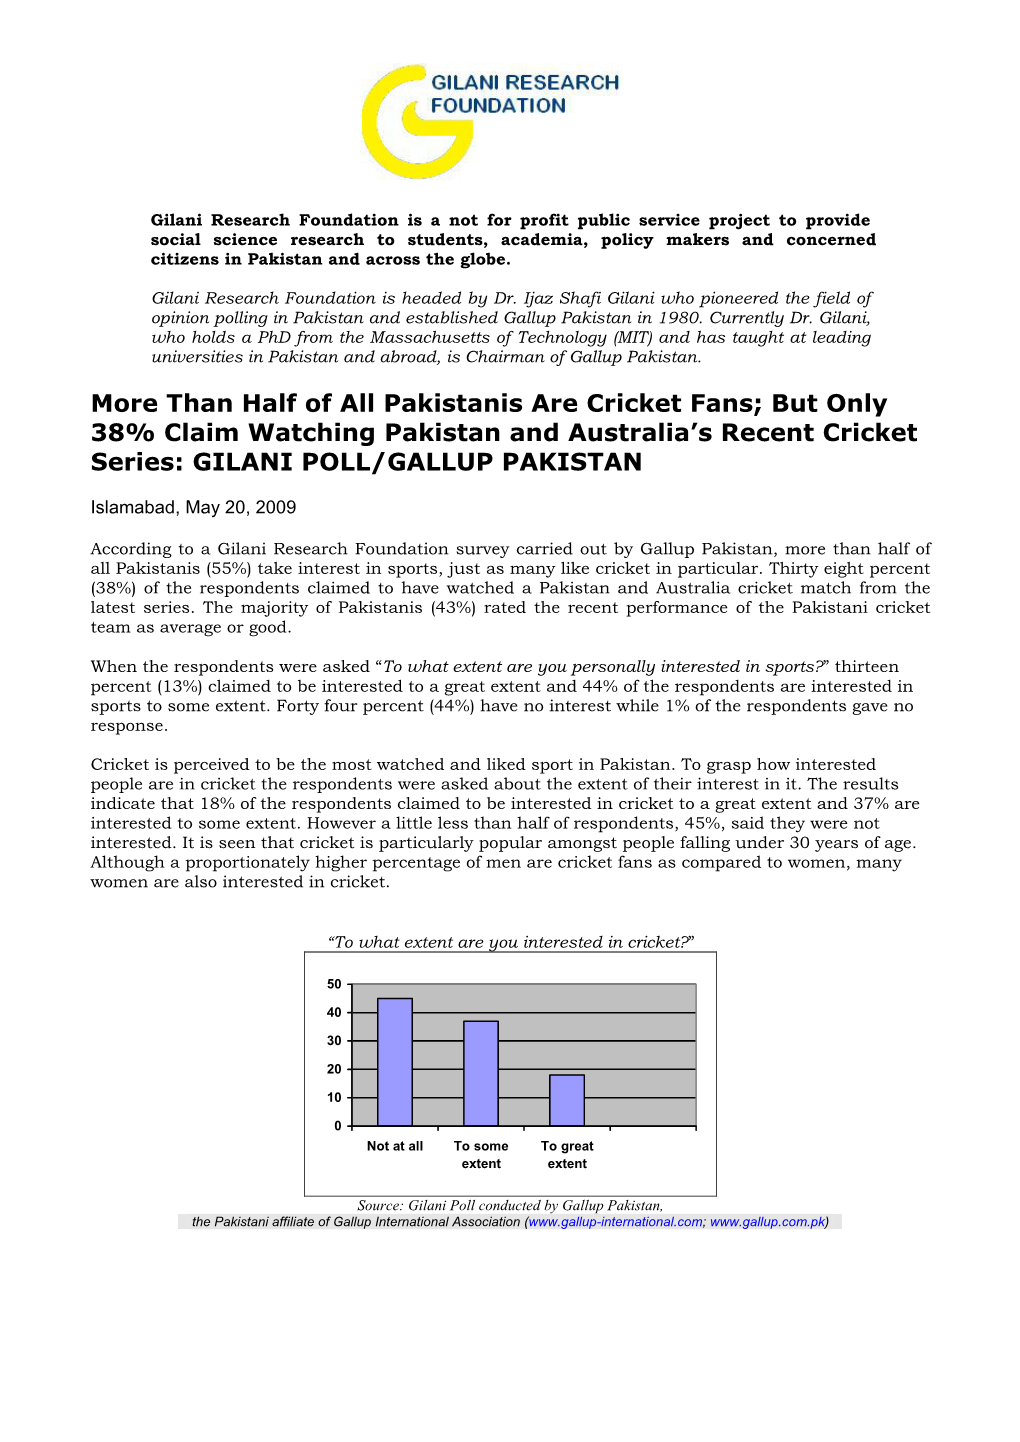 More Than Half of All Pakistanis Are Cricket Fans; but Only 38% Claim Watching Pakistan and Australia’S Recent Cricket Series: GILANI POLL/GALLUP PAKISTAN